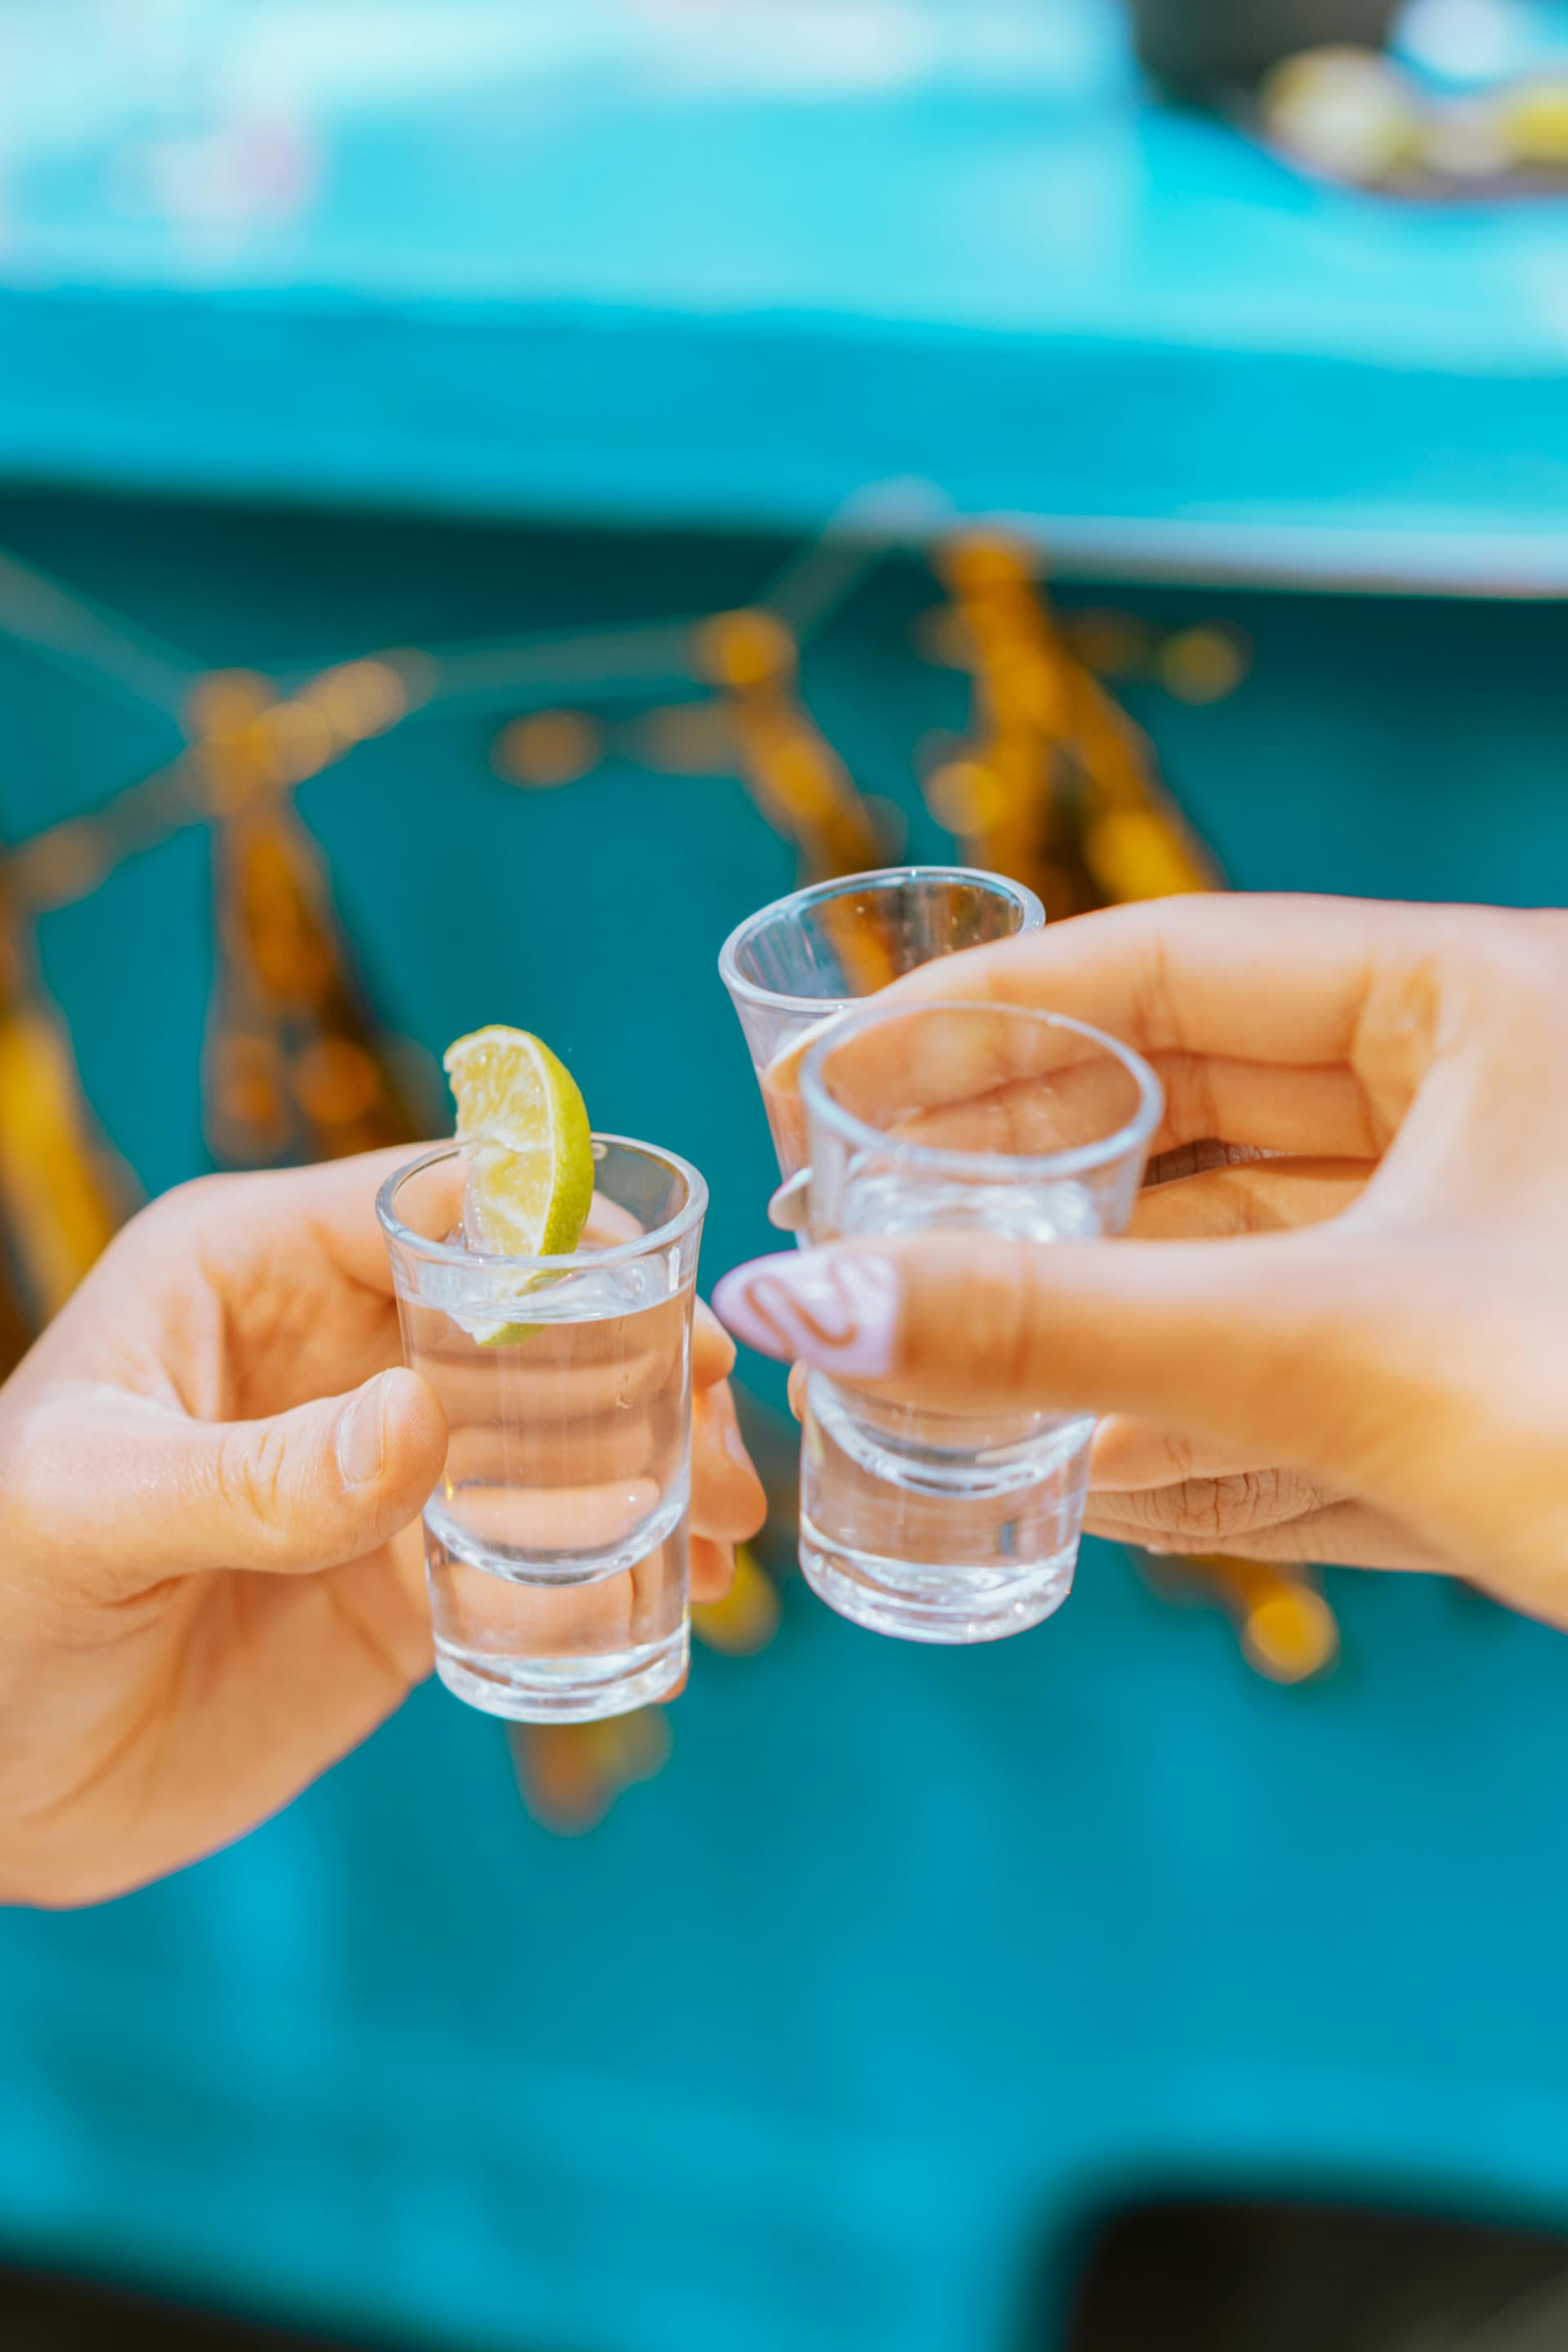 Tender Coconut Liquor Shots To Make Your Guests Go Coco-nuts